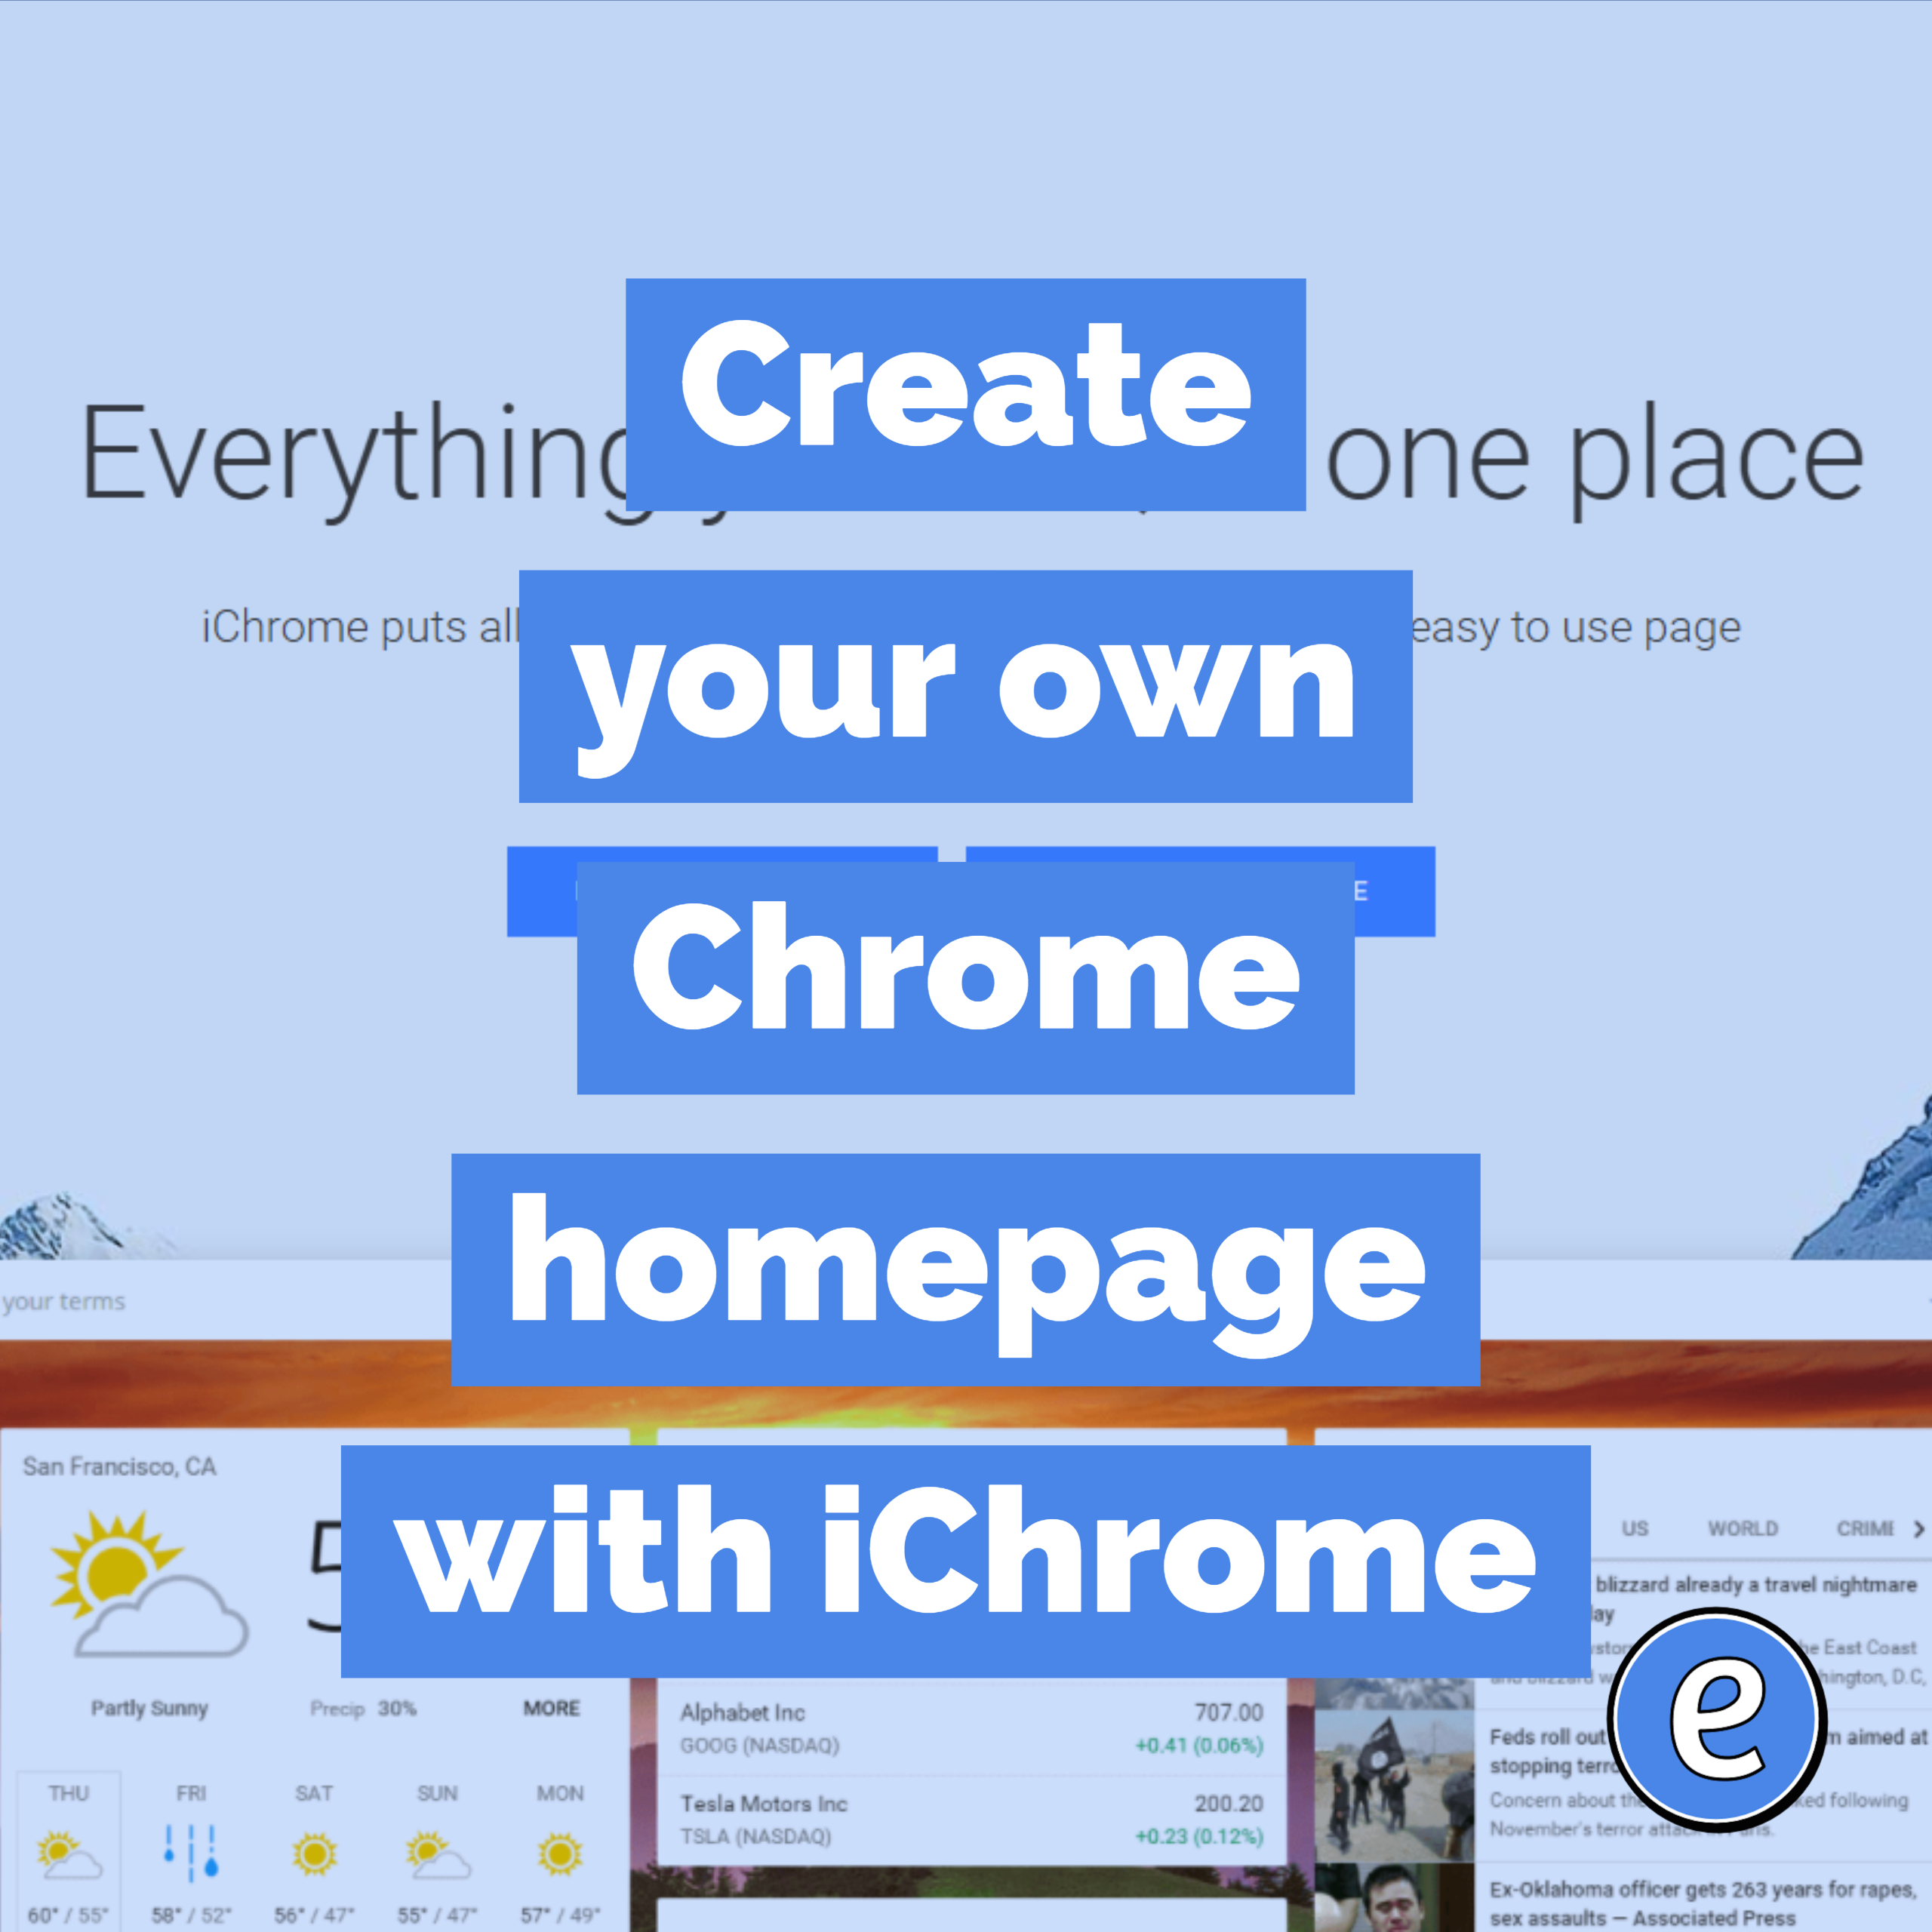 Create your own Chrome homepage with iChrome